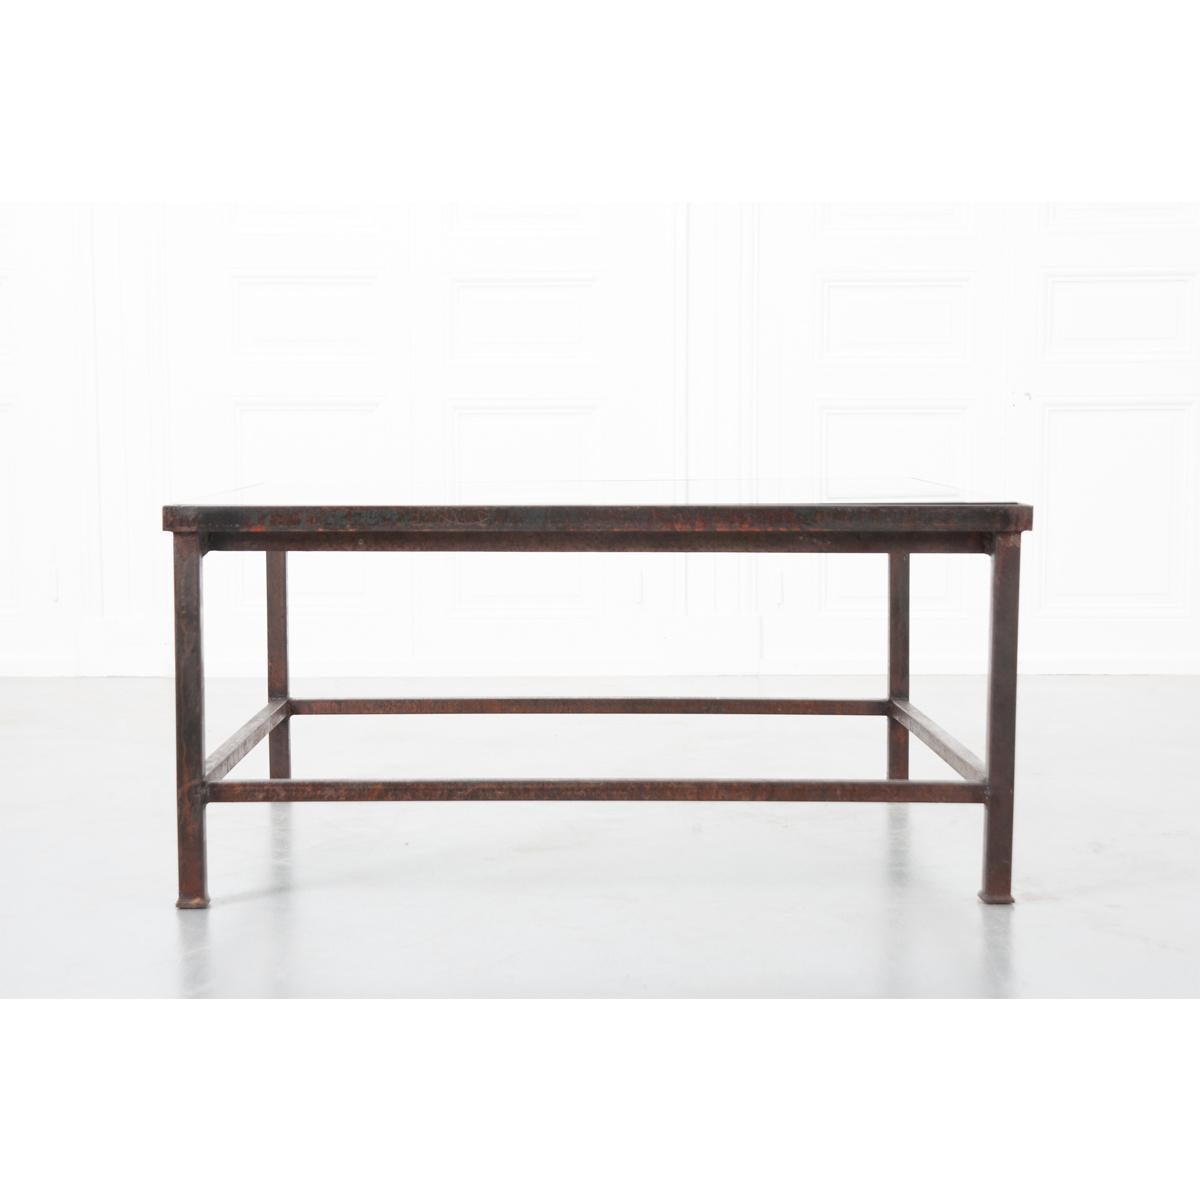 A wonderful marriage of old and new, this exceptional coffee or cocktail table has a newly fabricated base that incorporates a stunning architectural fragment, sourced from an antique French iron balcony surround, that is styled with scrolled